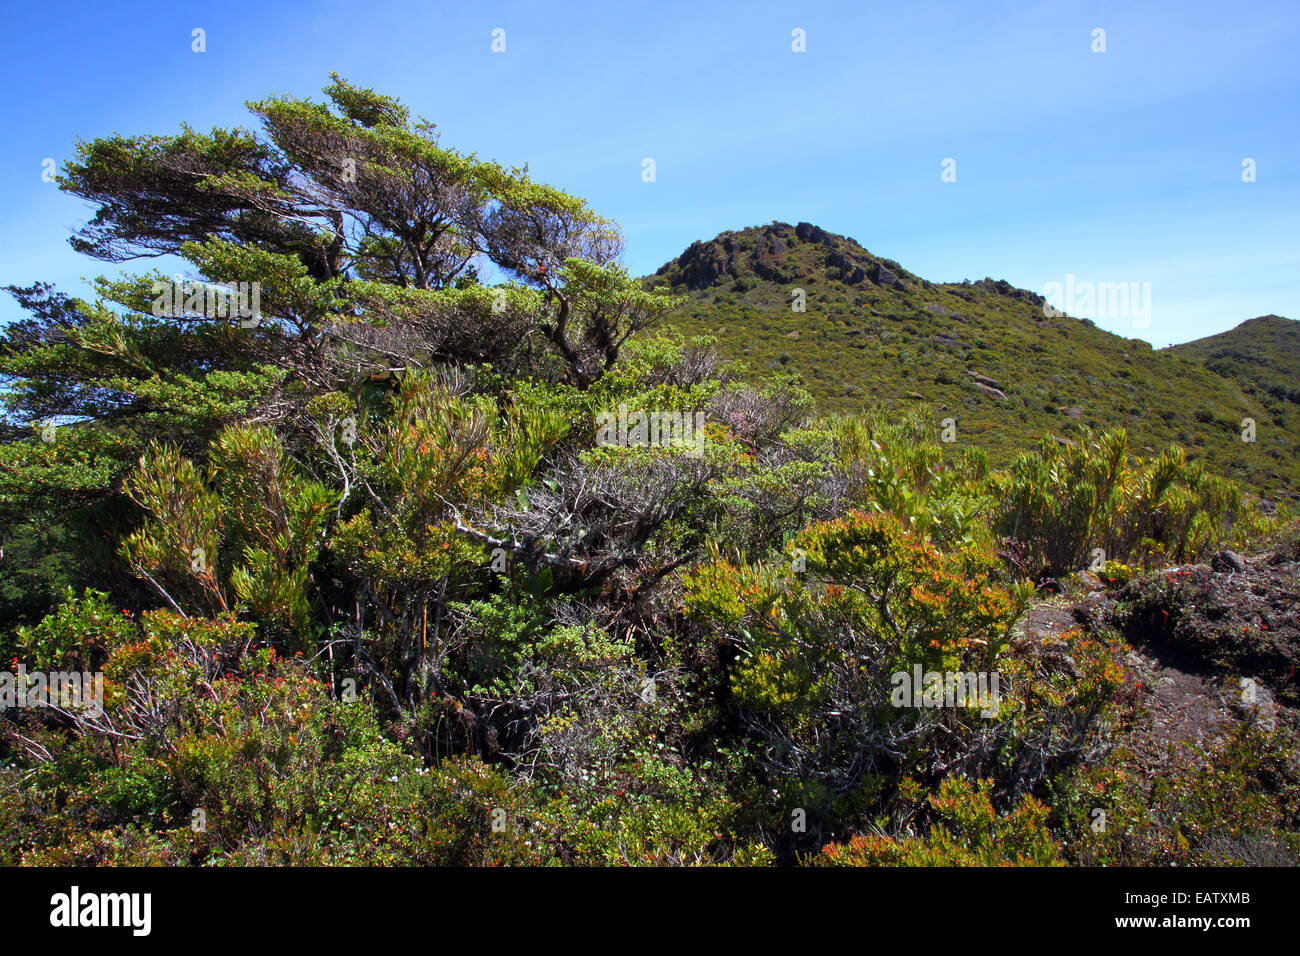 Adapted short vegetation at a high elevation of 9,000 feet. Stock Photo